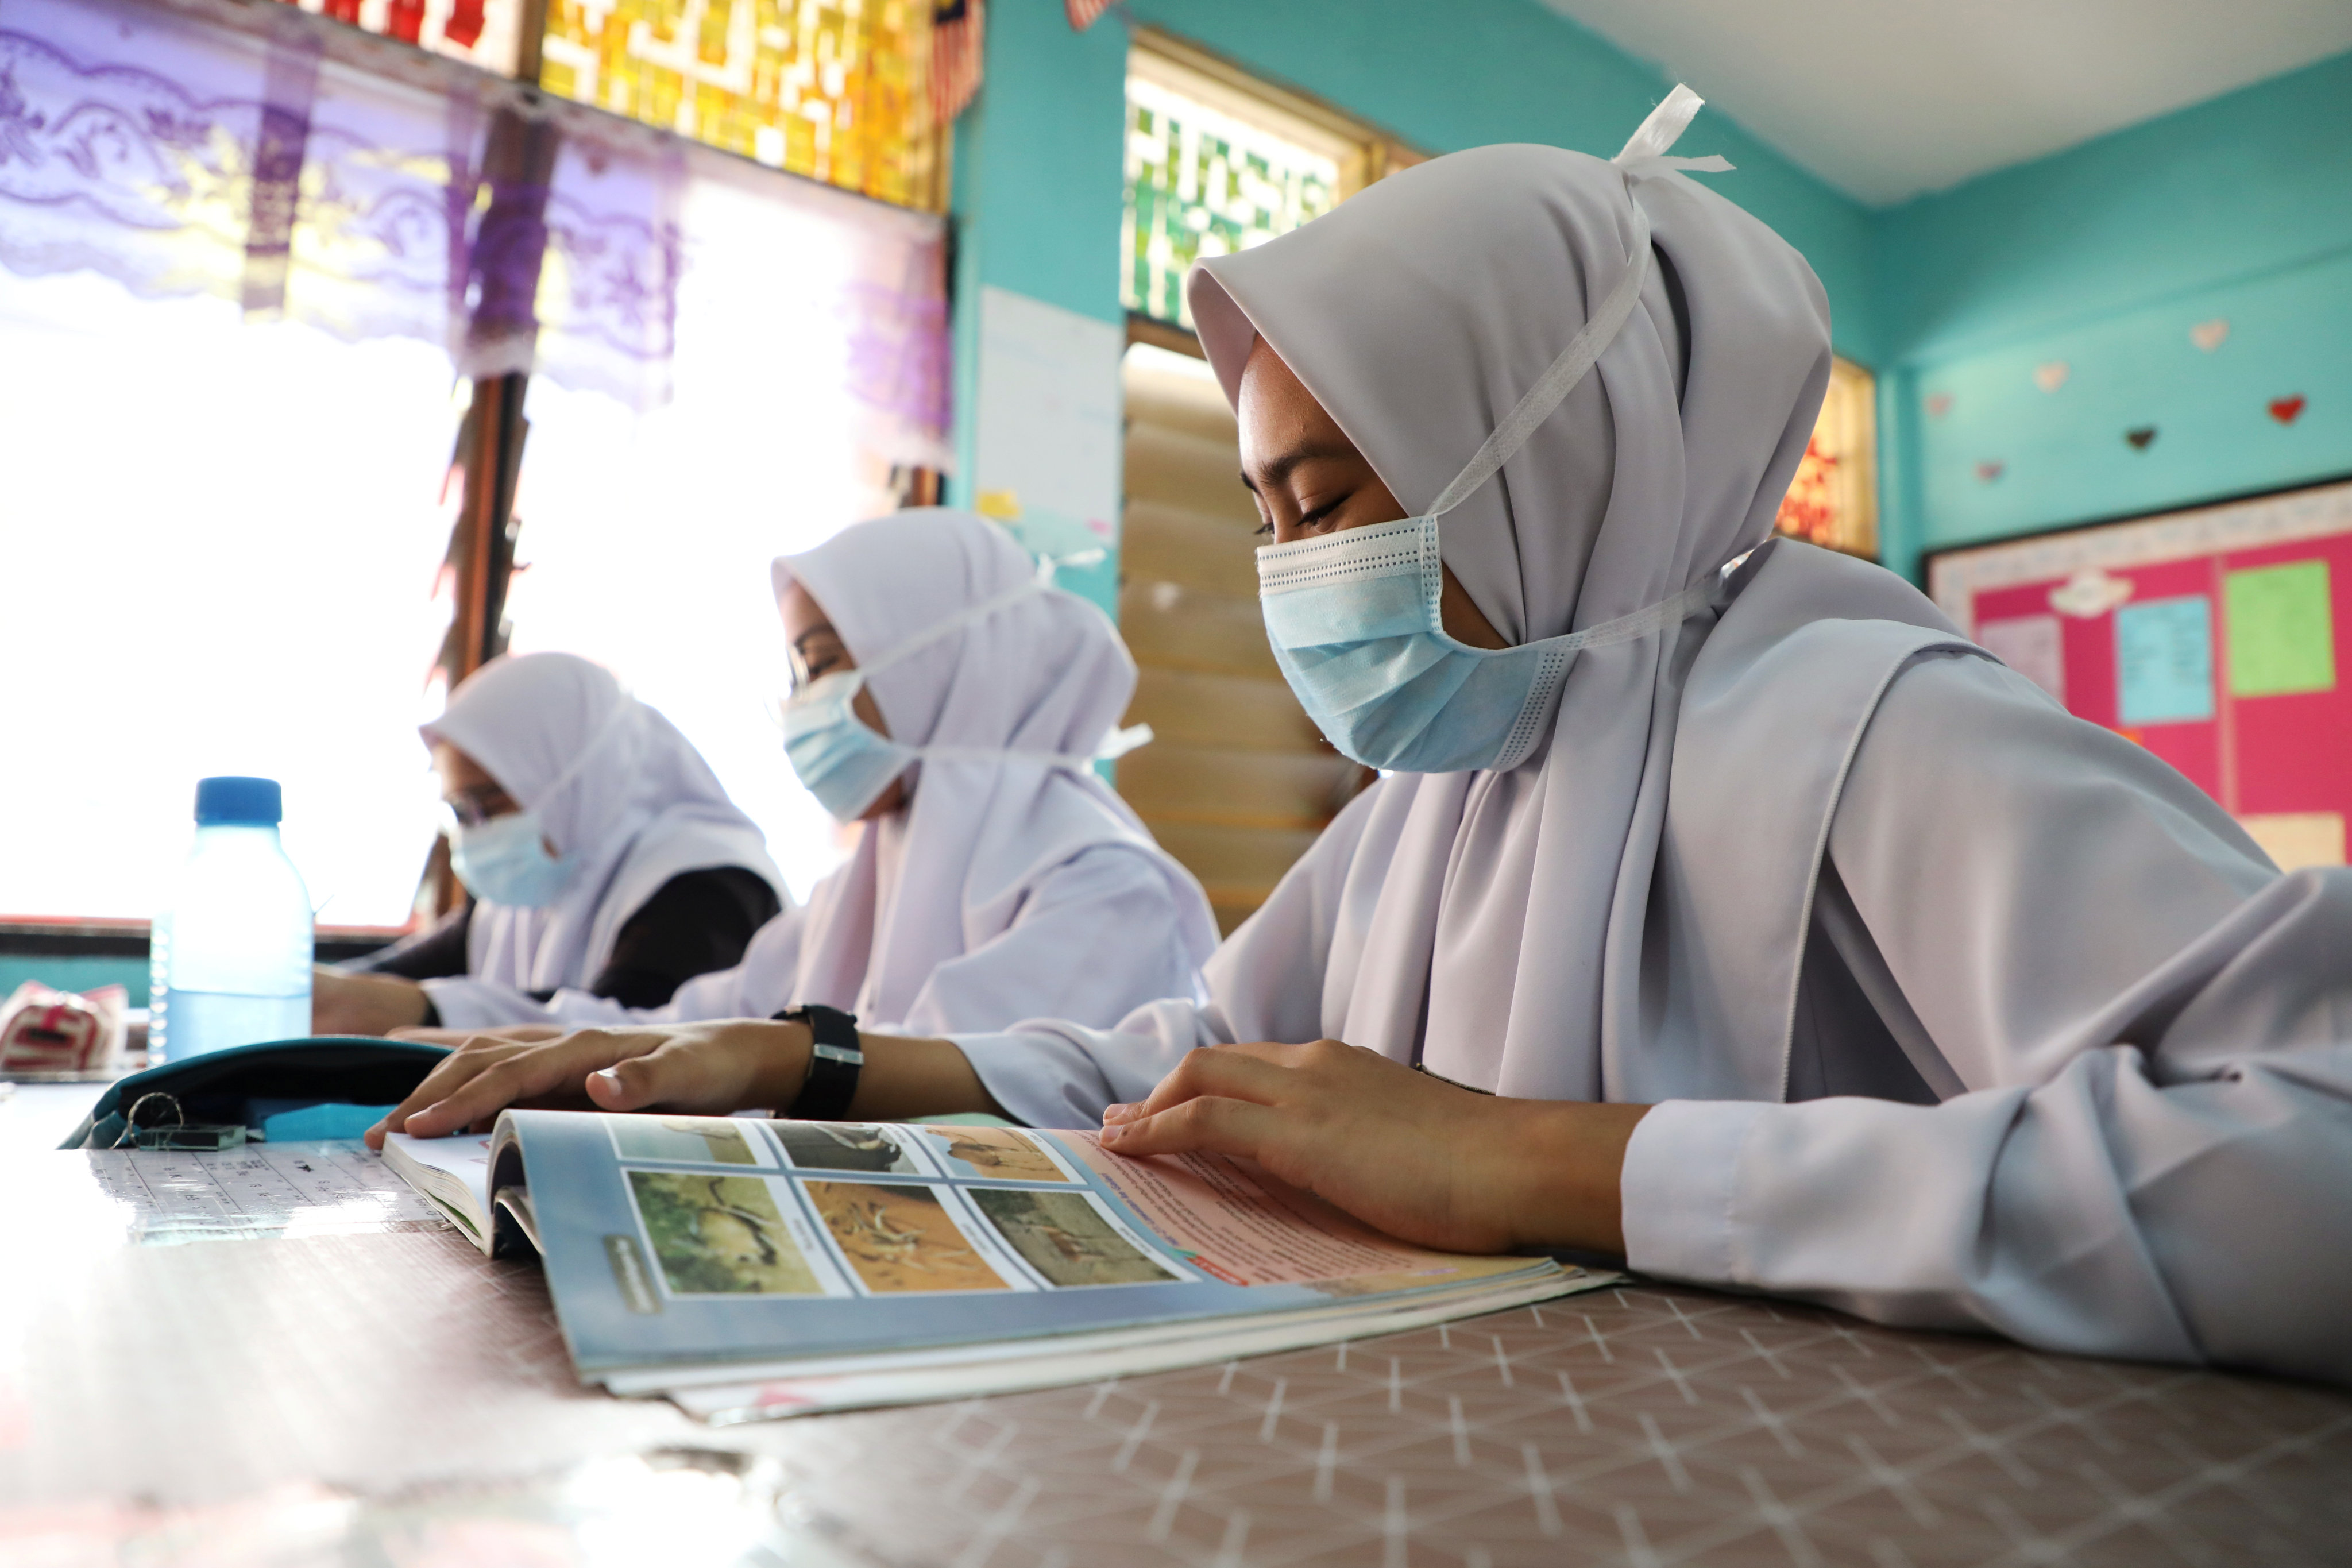 Students study their workbooks at a school on the outskirts of Kuala Lumpur. The plaintiffs in the case (not pictured) successfully sued their teacher – as well as the school principal, the education minister, education ministry director general and the government – for violating their constitutional right to education. Photo: Reuters